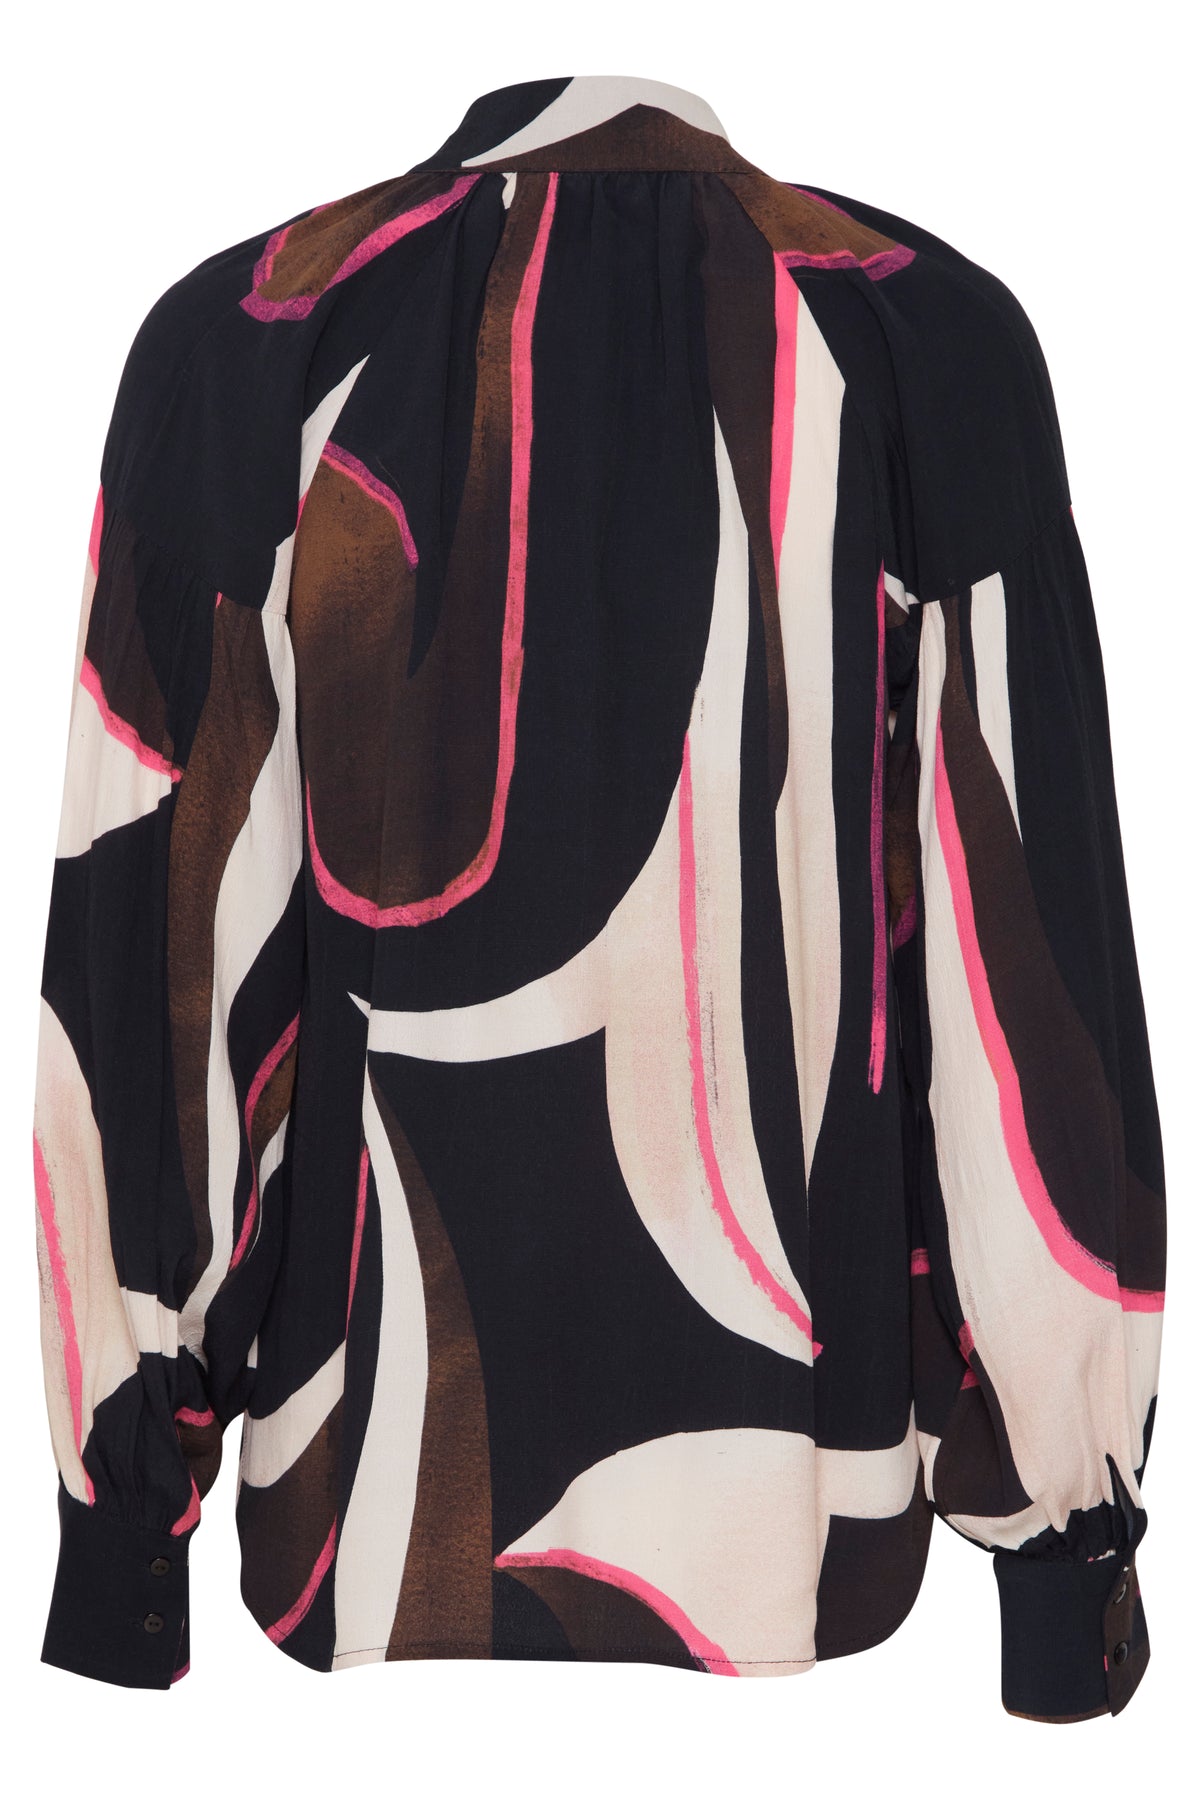 Fransa Frlena Navy Blazer/Pink Blouse, 67 – Ruby 20613285 Printed Abstract Boutique